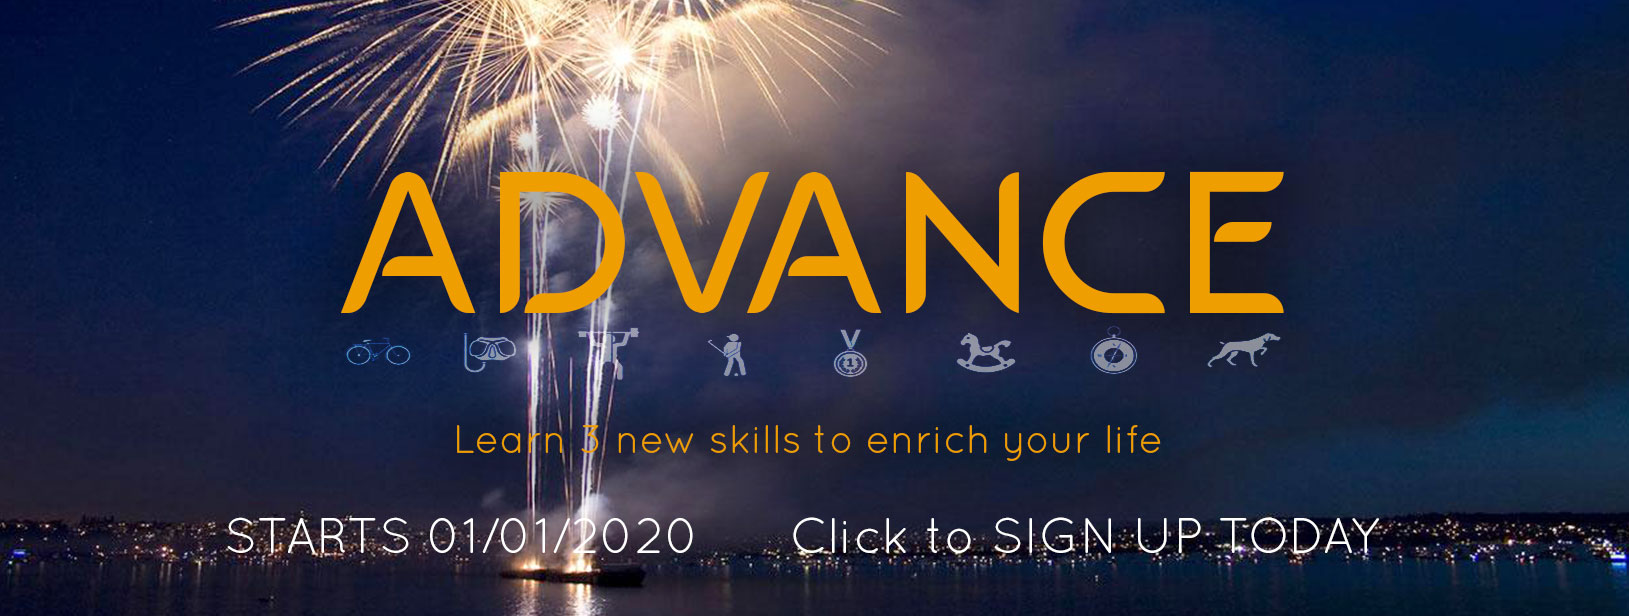 advance - the extreme learning course